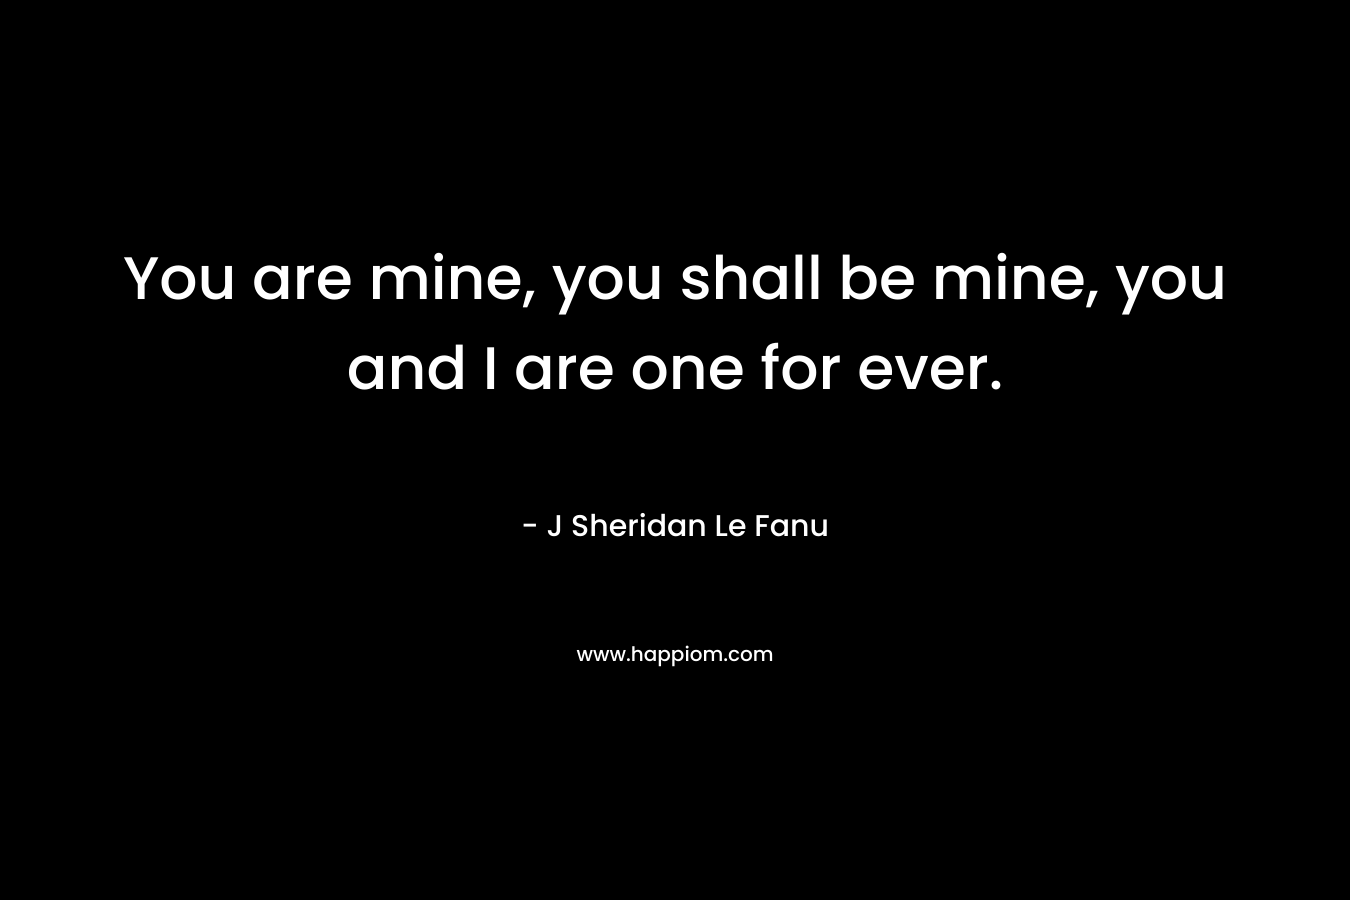 You are mine, you shall be mine, you and I are one for ever.